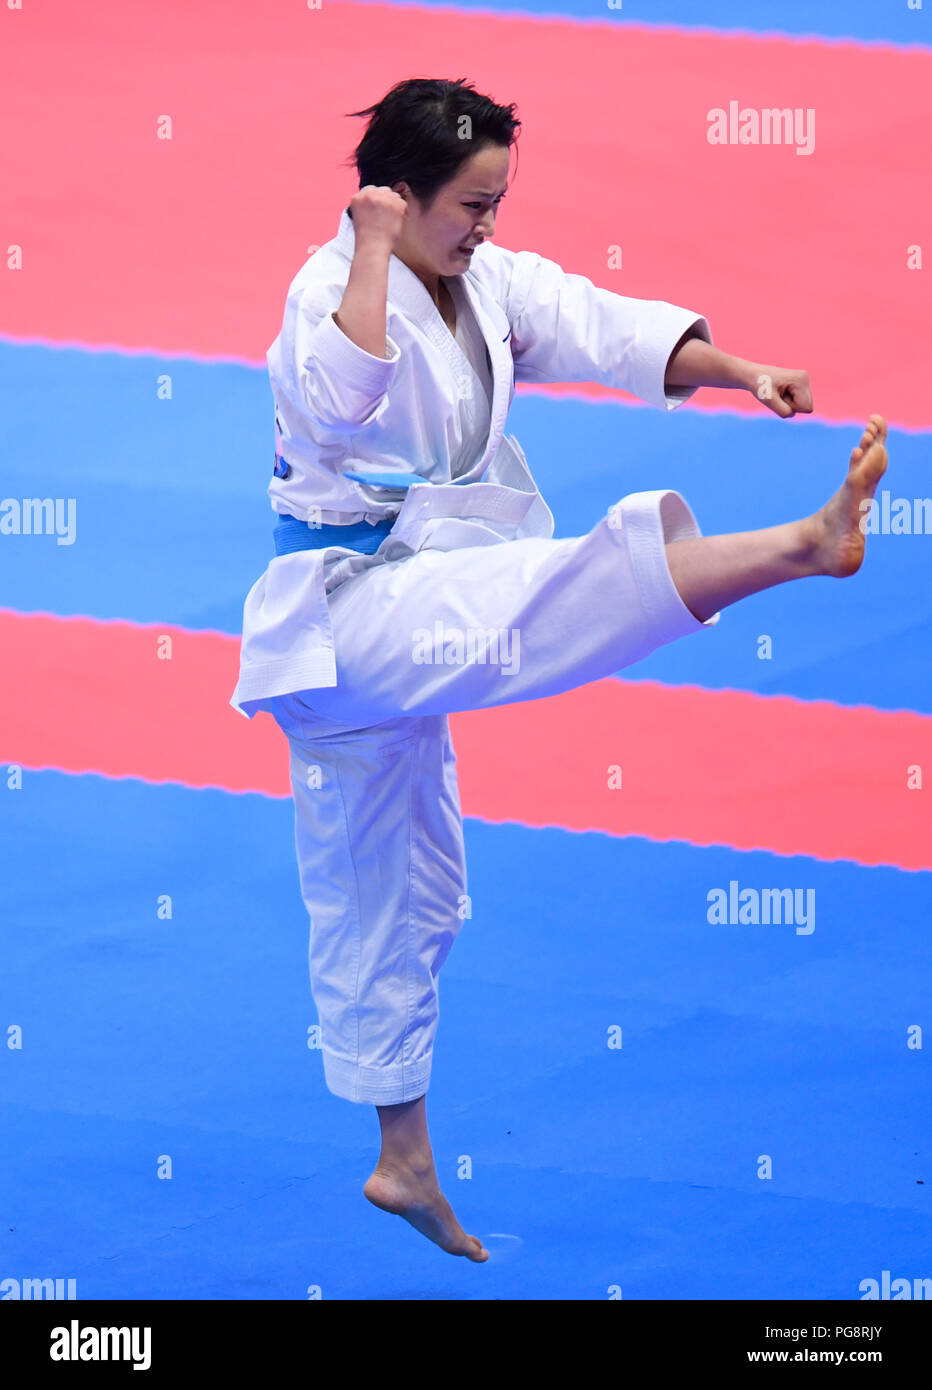 Jakarta, Indonesia. 25th Aug, 2018. Shimizu Kiyou of Japan competes during the women's Kata final contest at the 18th Asian Games in Jakarta, Indonesia, Aug. 25, 2018. Credit: Huang Zongzhi/Xinhua/Alamy Live News Stock Photo